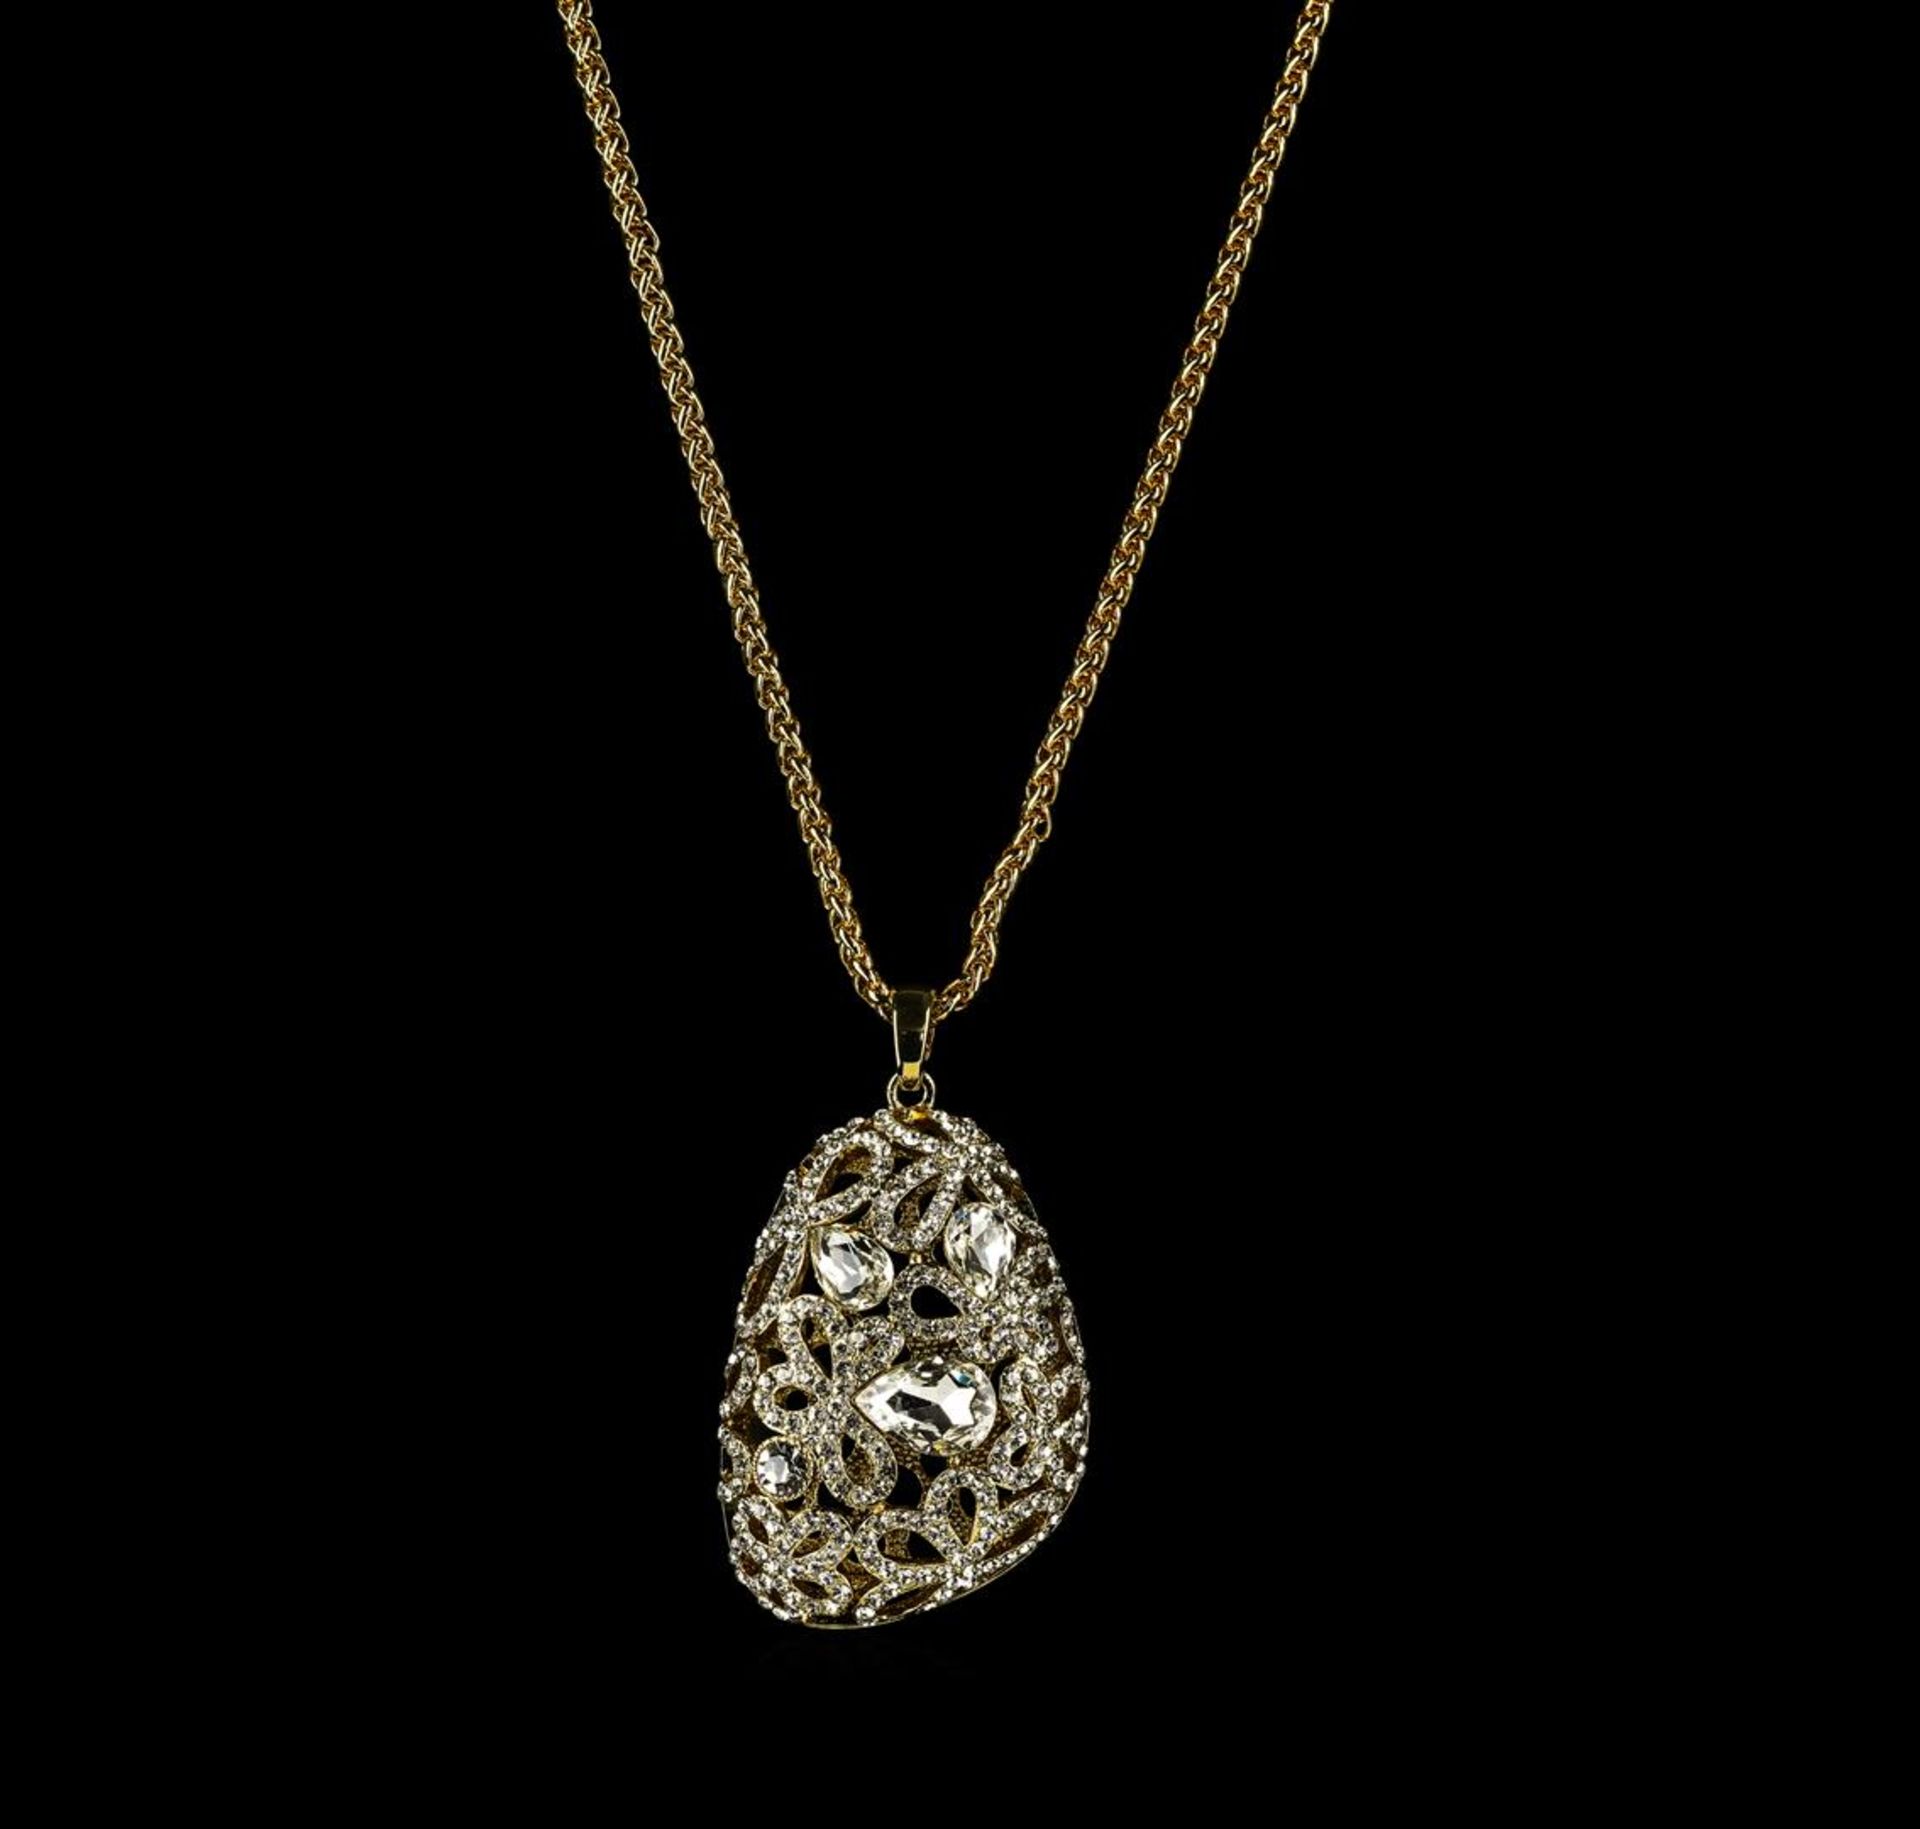 Assym Filigree Crystal Pendant Necklace - Gold Plated - Image 2 of 2